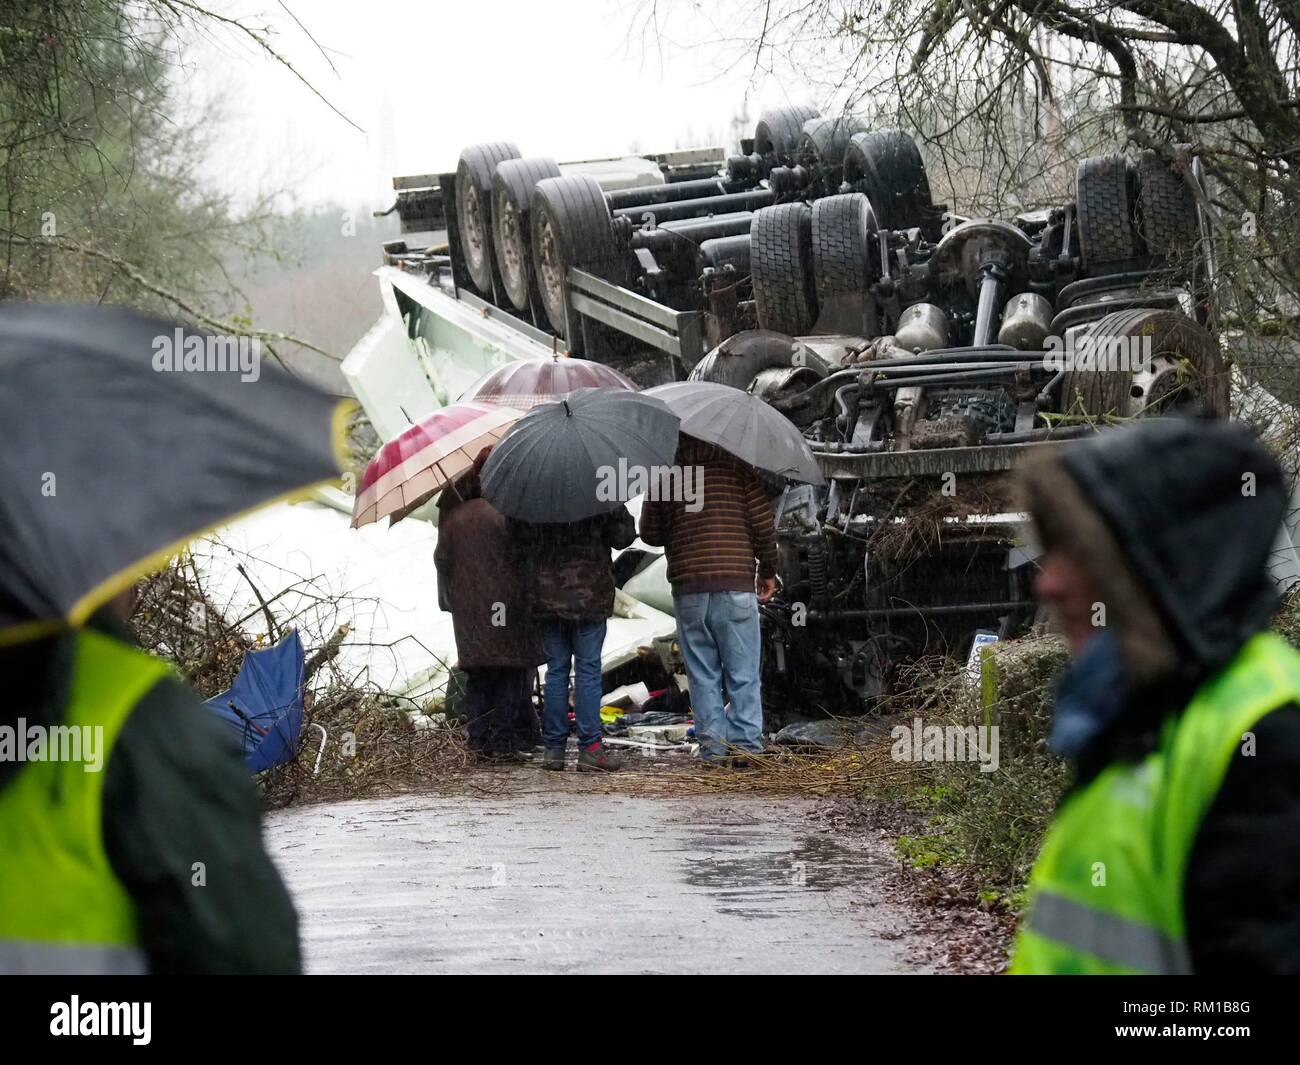 Monforte de Lemos, Lugo.- accident N-120 truck and a car.- One person has been killed and another very serious injury in a traffic accident. Date: Stock Photo